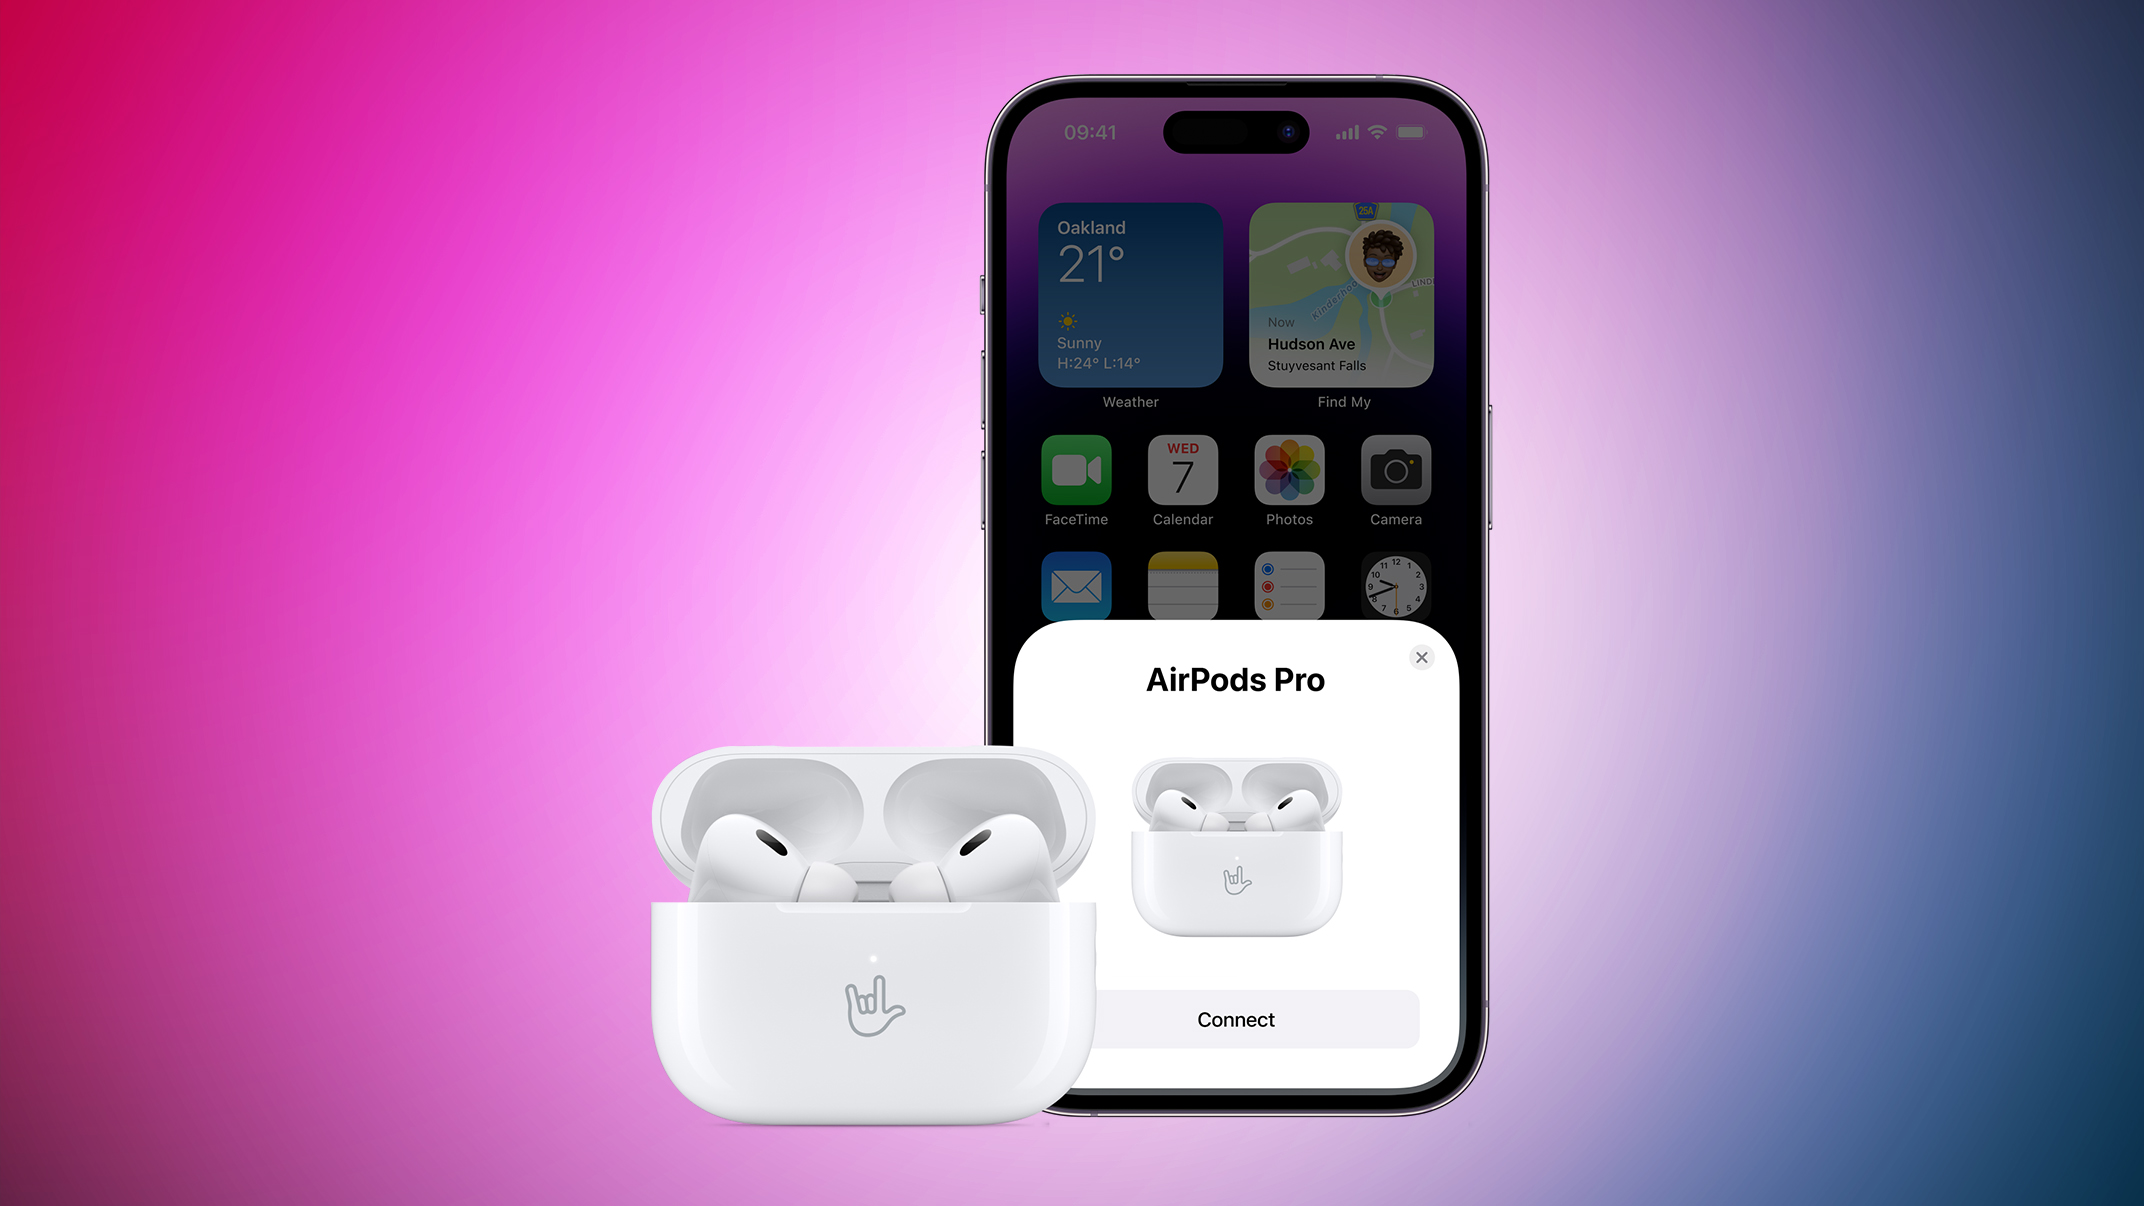 AirPods Pro 2 Engravings Appear in iOS During Pairing and Connecting